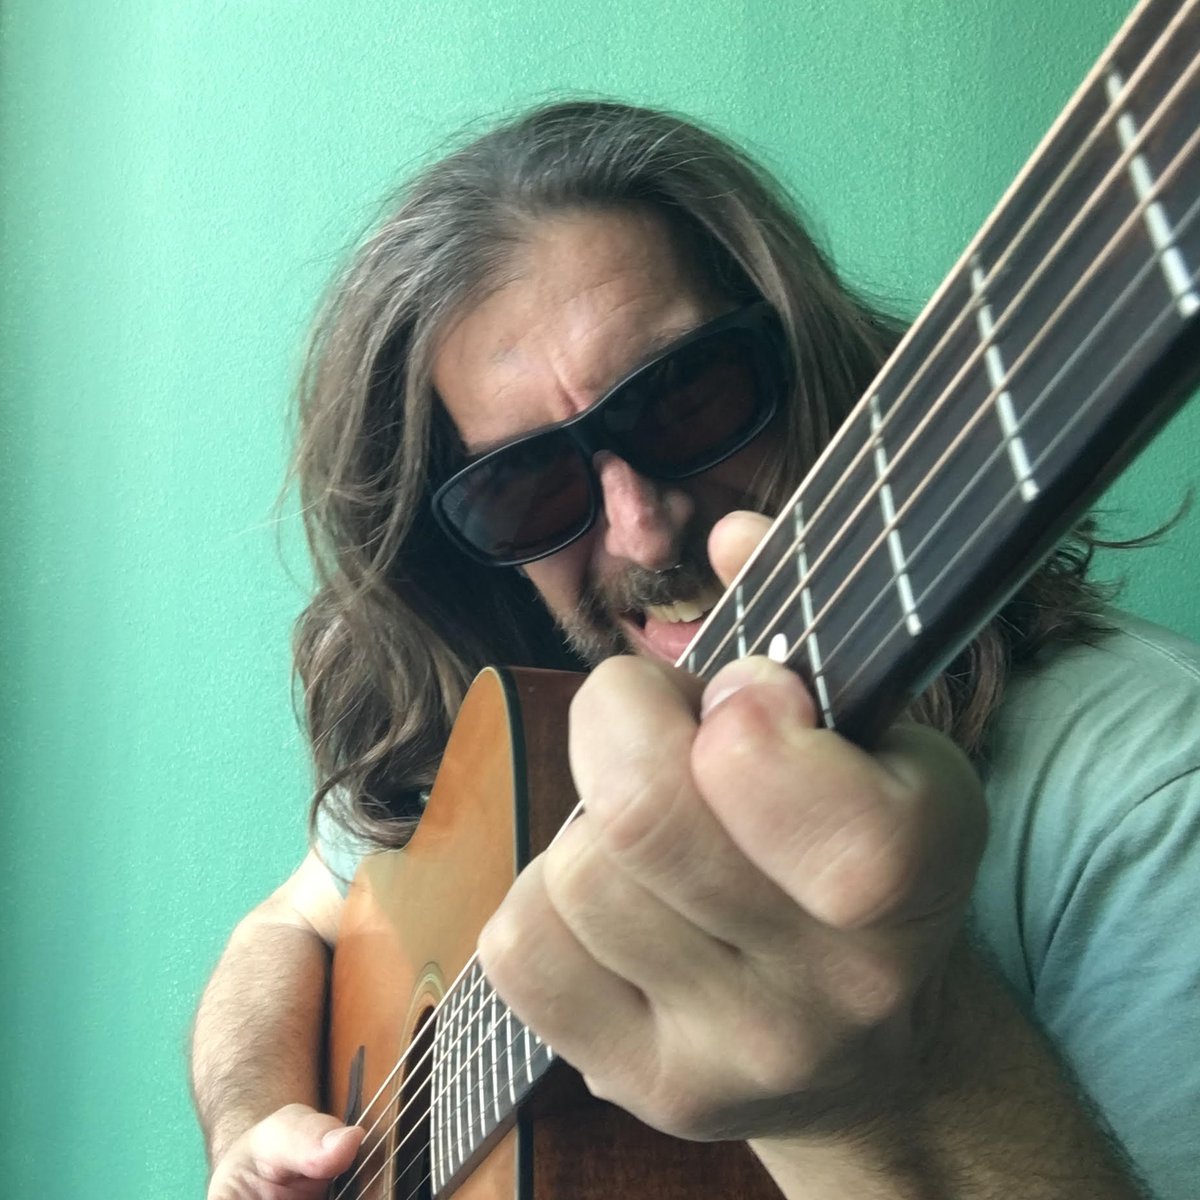 Playing Sam's Place tonight promoting the imminent release of 'Reasons' my first single of 2024.  #livemusic #ojai #venturamusic #acousticmusic #rocknroll
Stream it....It helps me book more shows when you listen!  open.spotify.com/artist/6unIeK4…
More to come. Enjoy the ride!